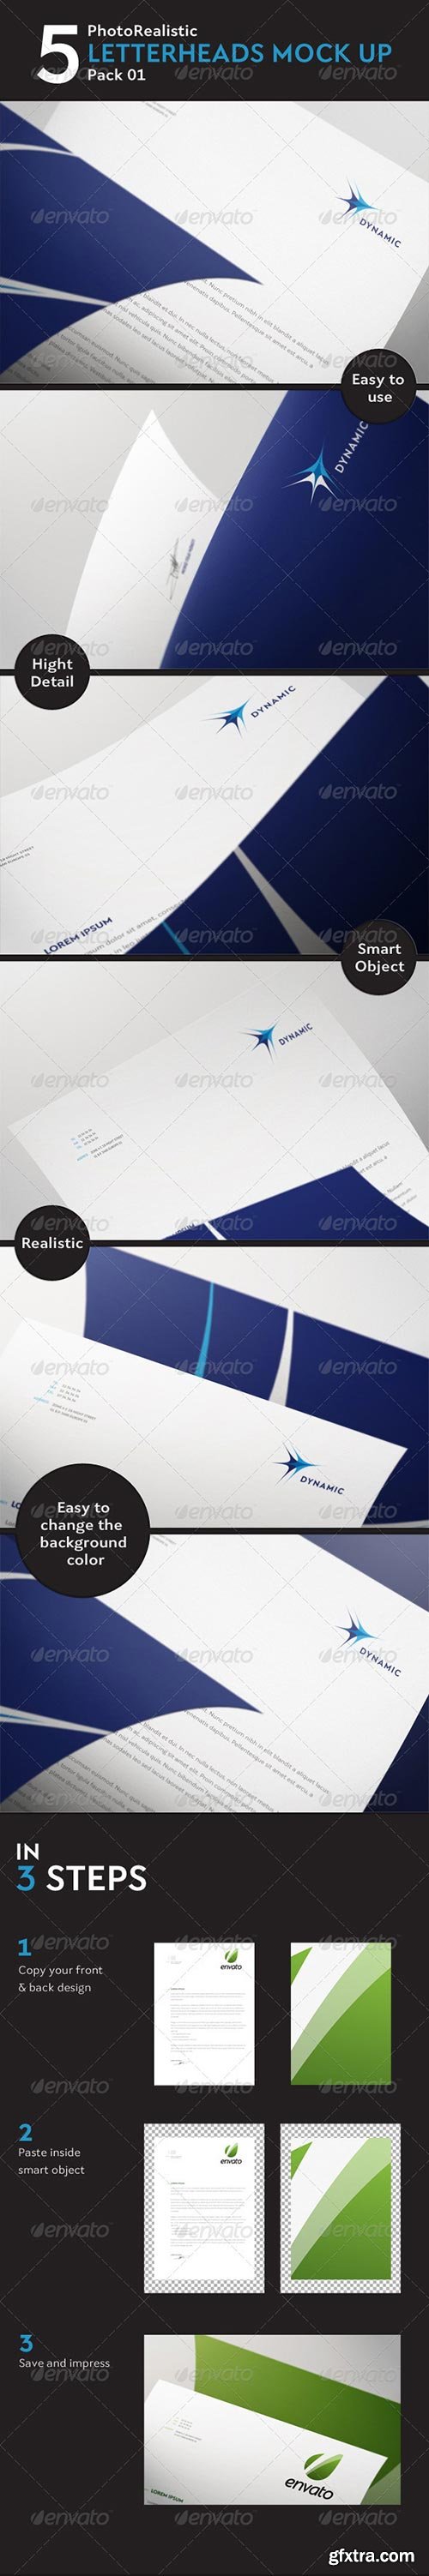 GraphicRiver - 5 Photorealistic Letterhead Mock Up Pack 01 2862548